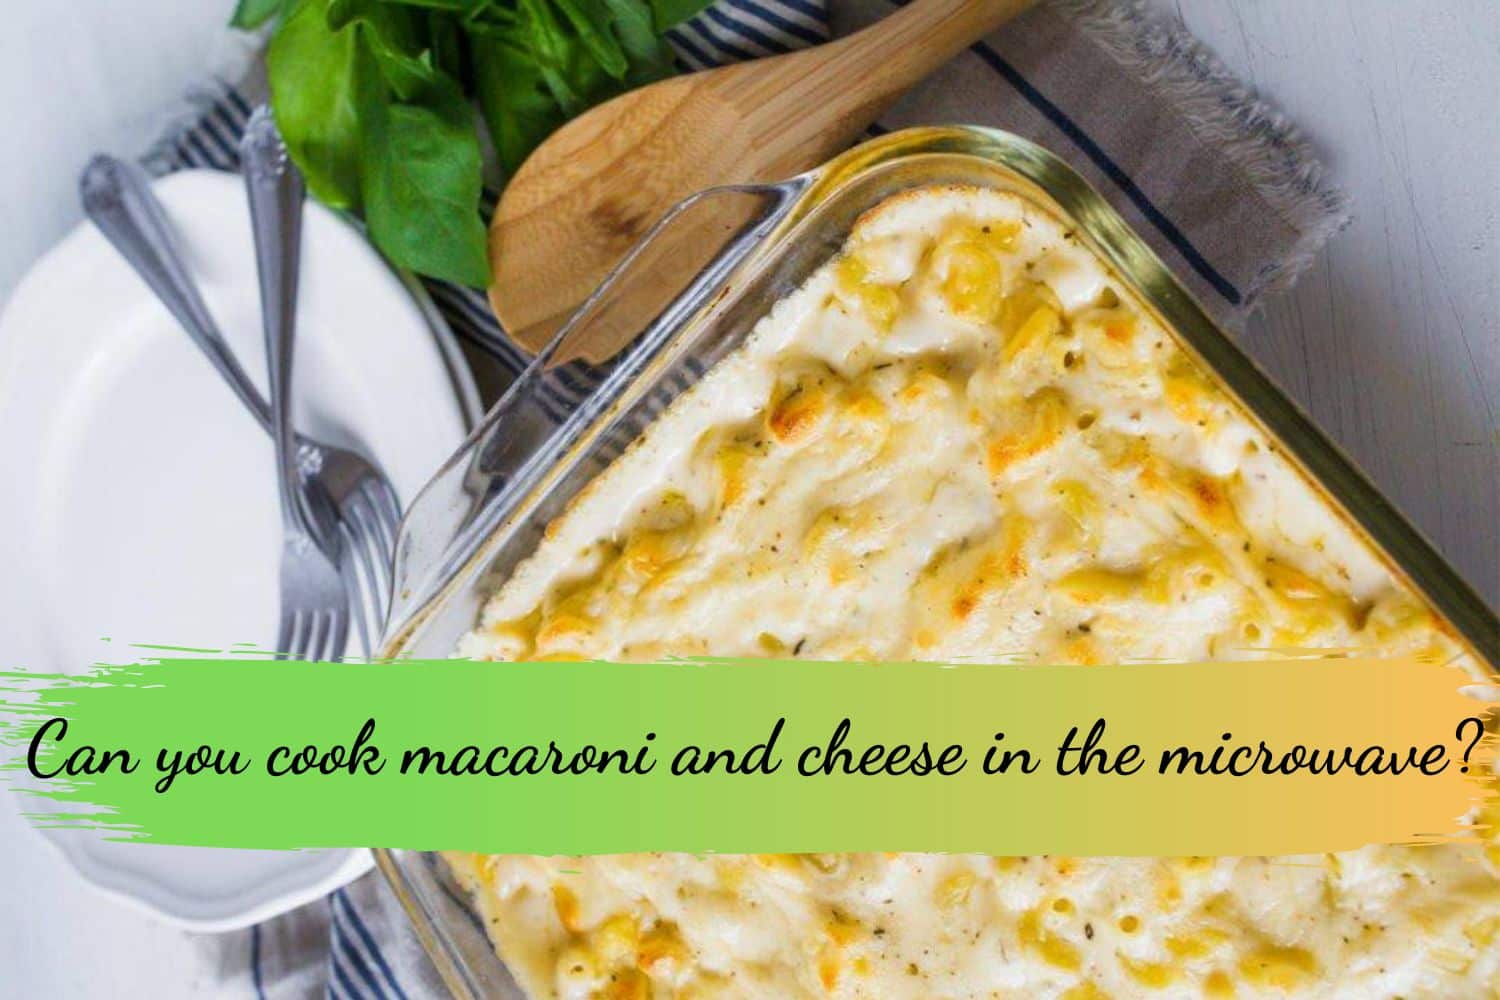 Can you cook macaroni and cheese in the microwave?